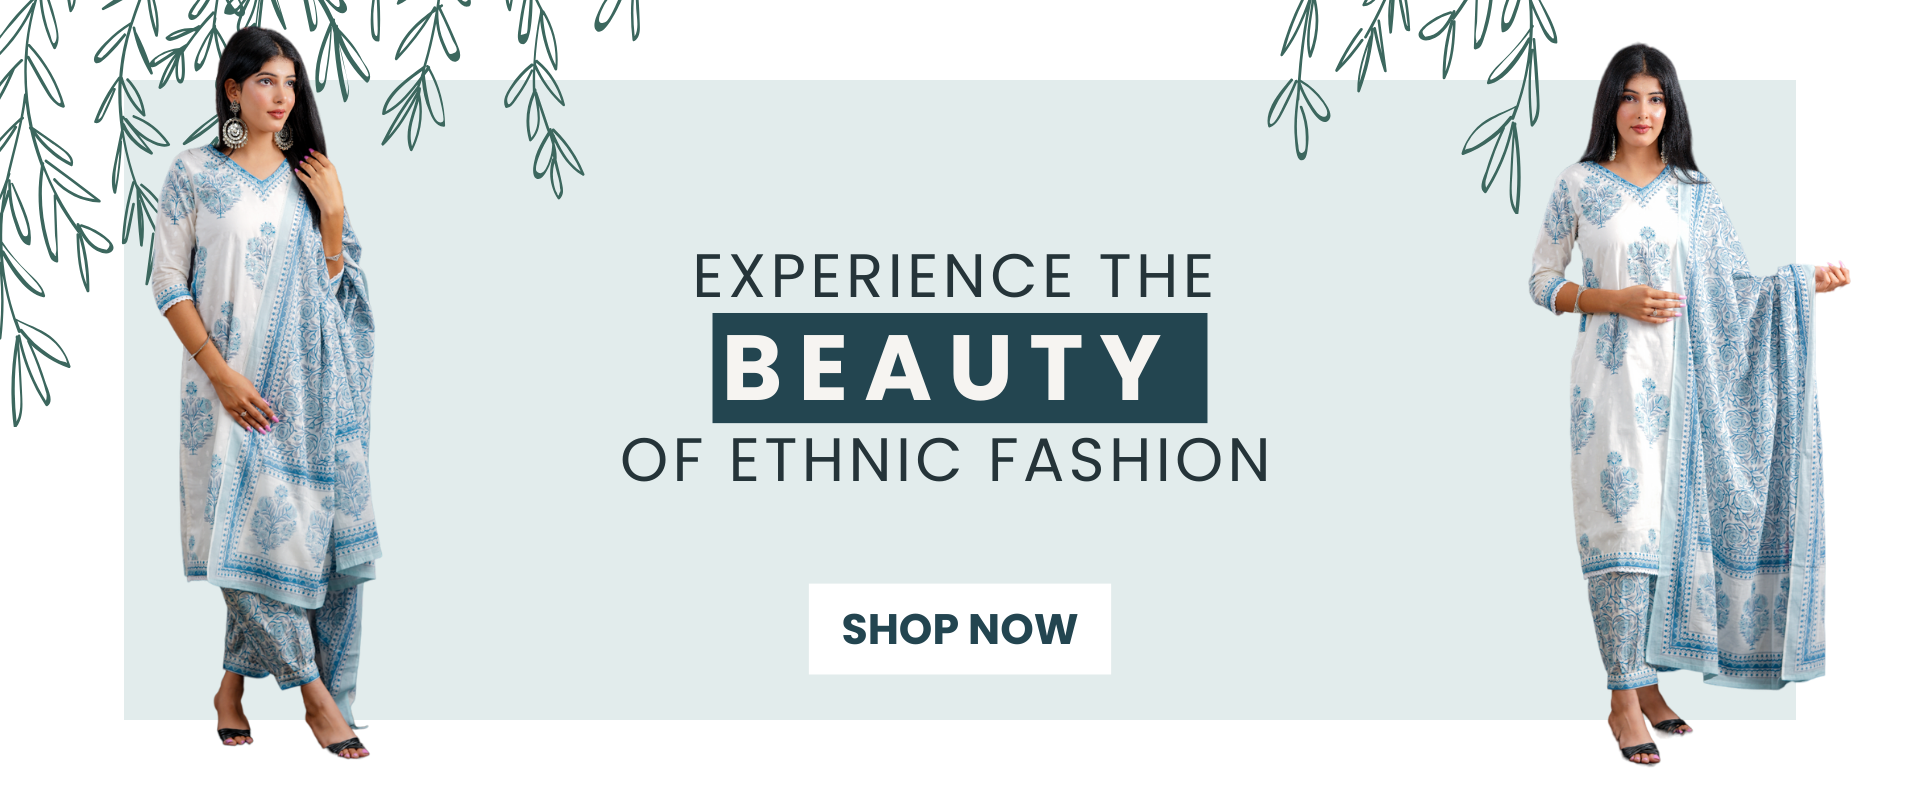 experience the beauty of ethnic fashion